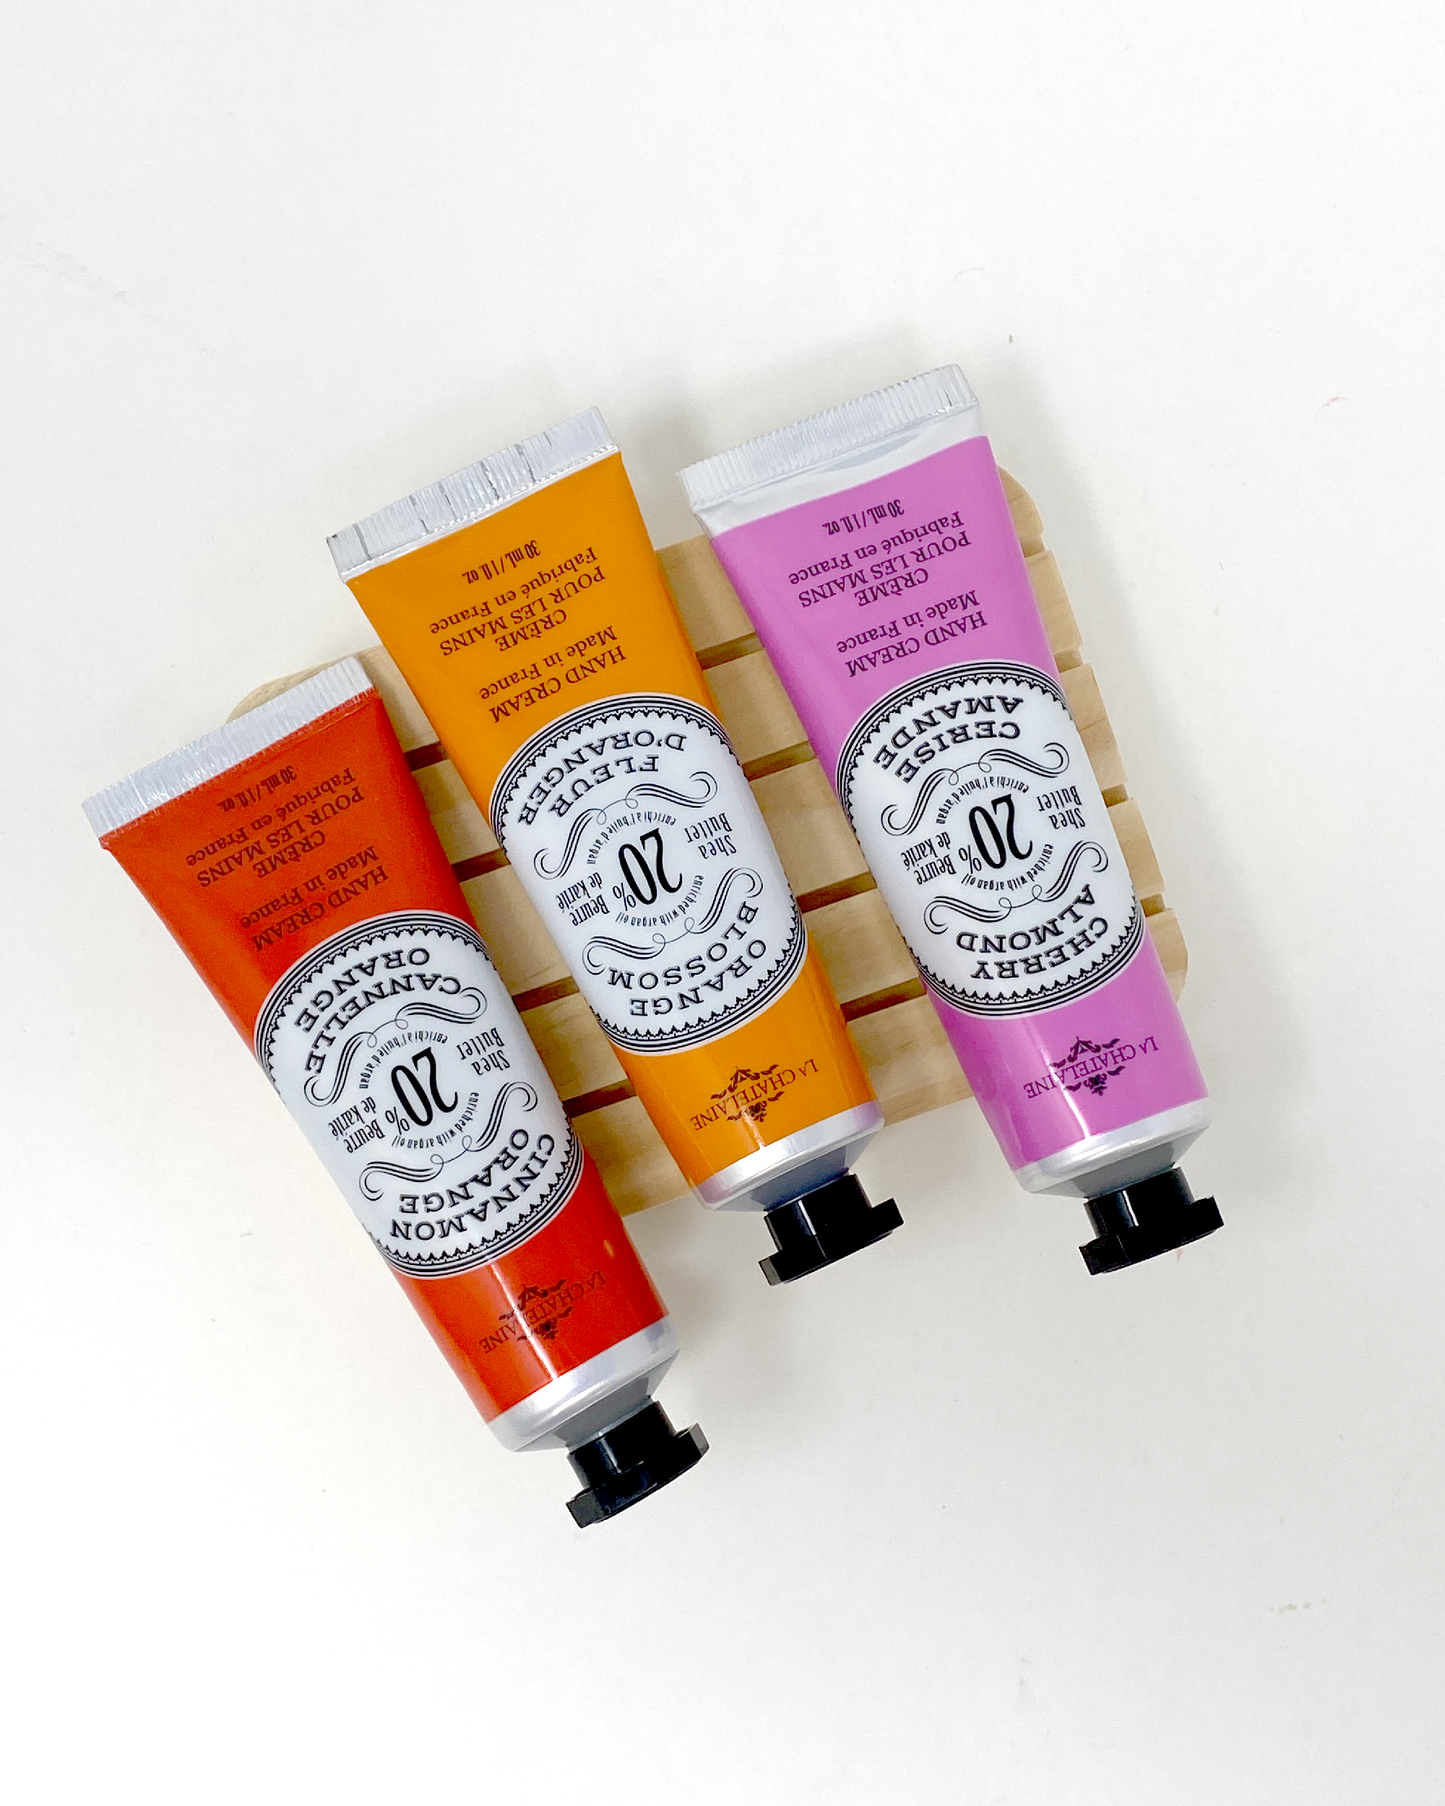 Luxury hand lotion made with shea butter and argan oil. La Chatelaine hand lotion made in France